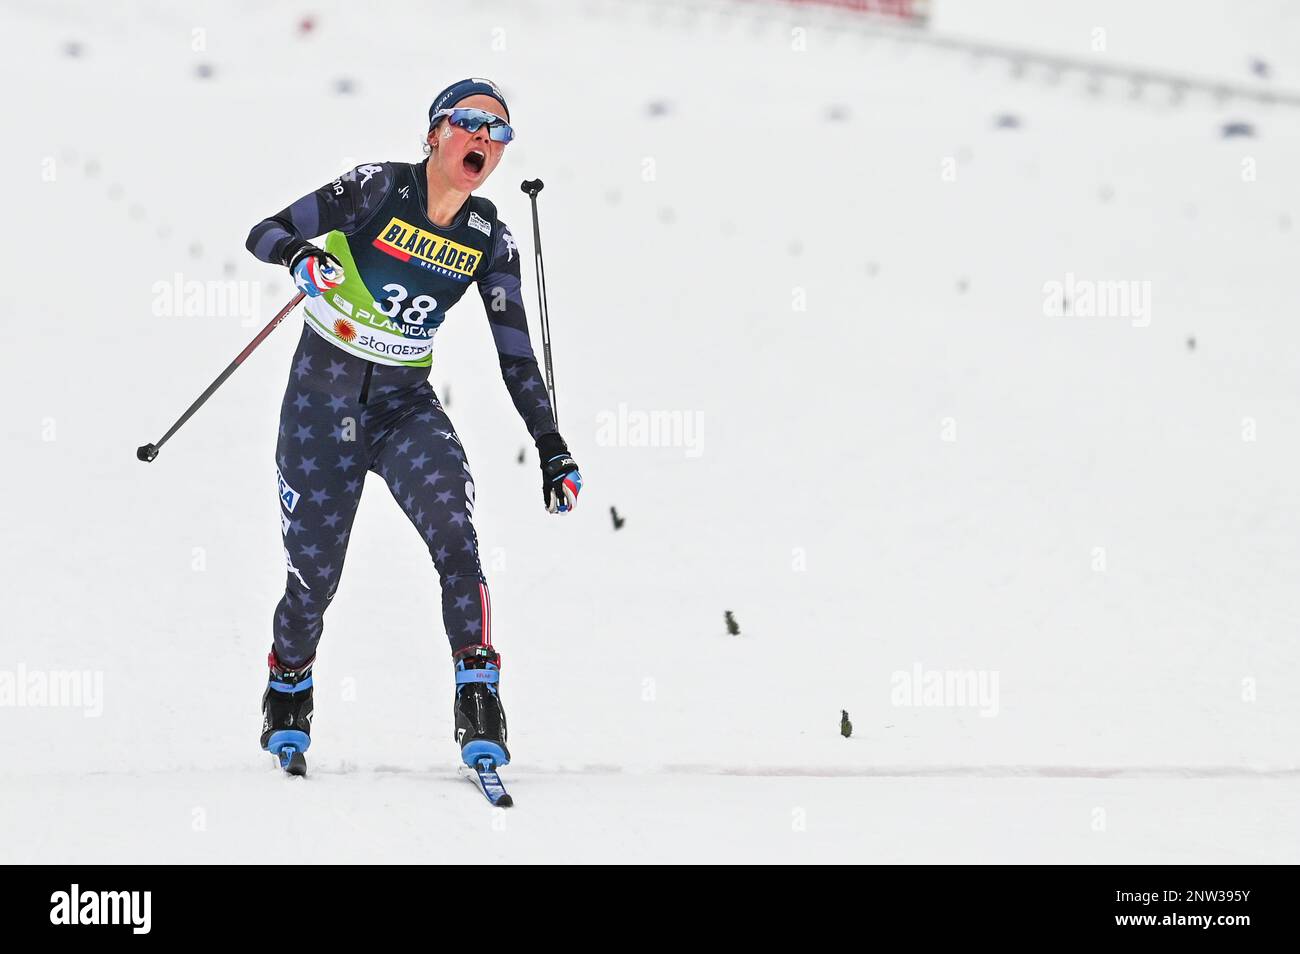 Planica, Slovenia. 28th Feb, 2023. American Jessie Diggins crosses the finish line to win the women’s 10-K freestyle race at the 2023 FIS World Nordic Ski Championships in Planica, Slovenia. John Lazenby/Alamy Live news Stock Photo